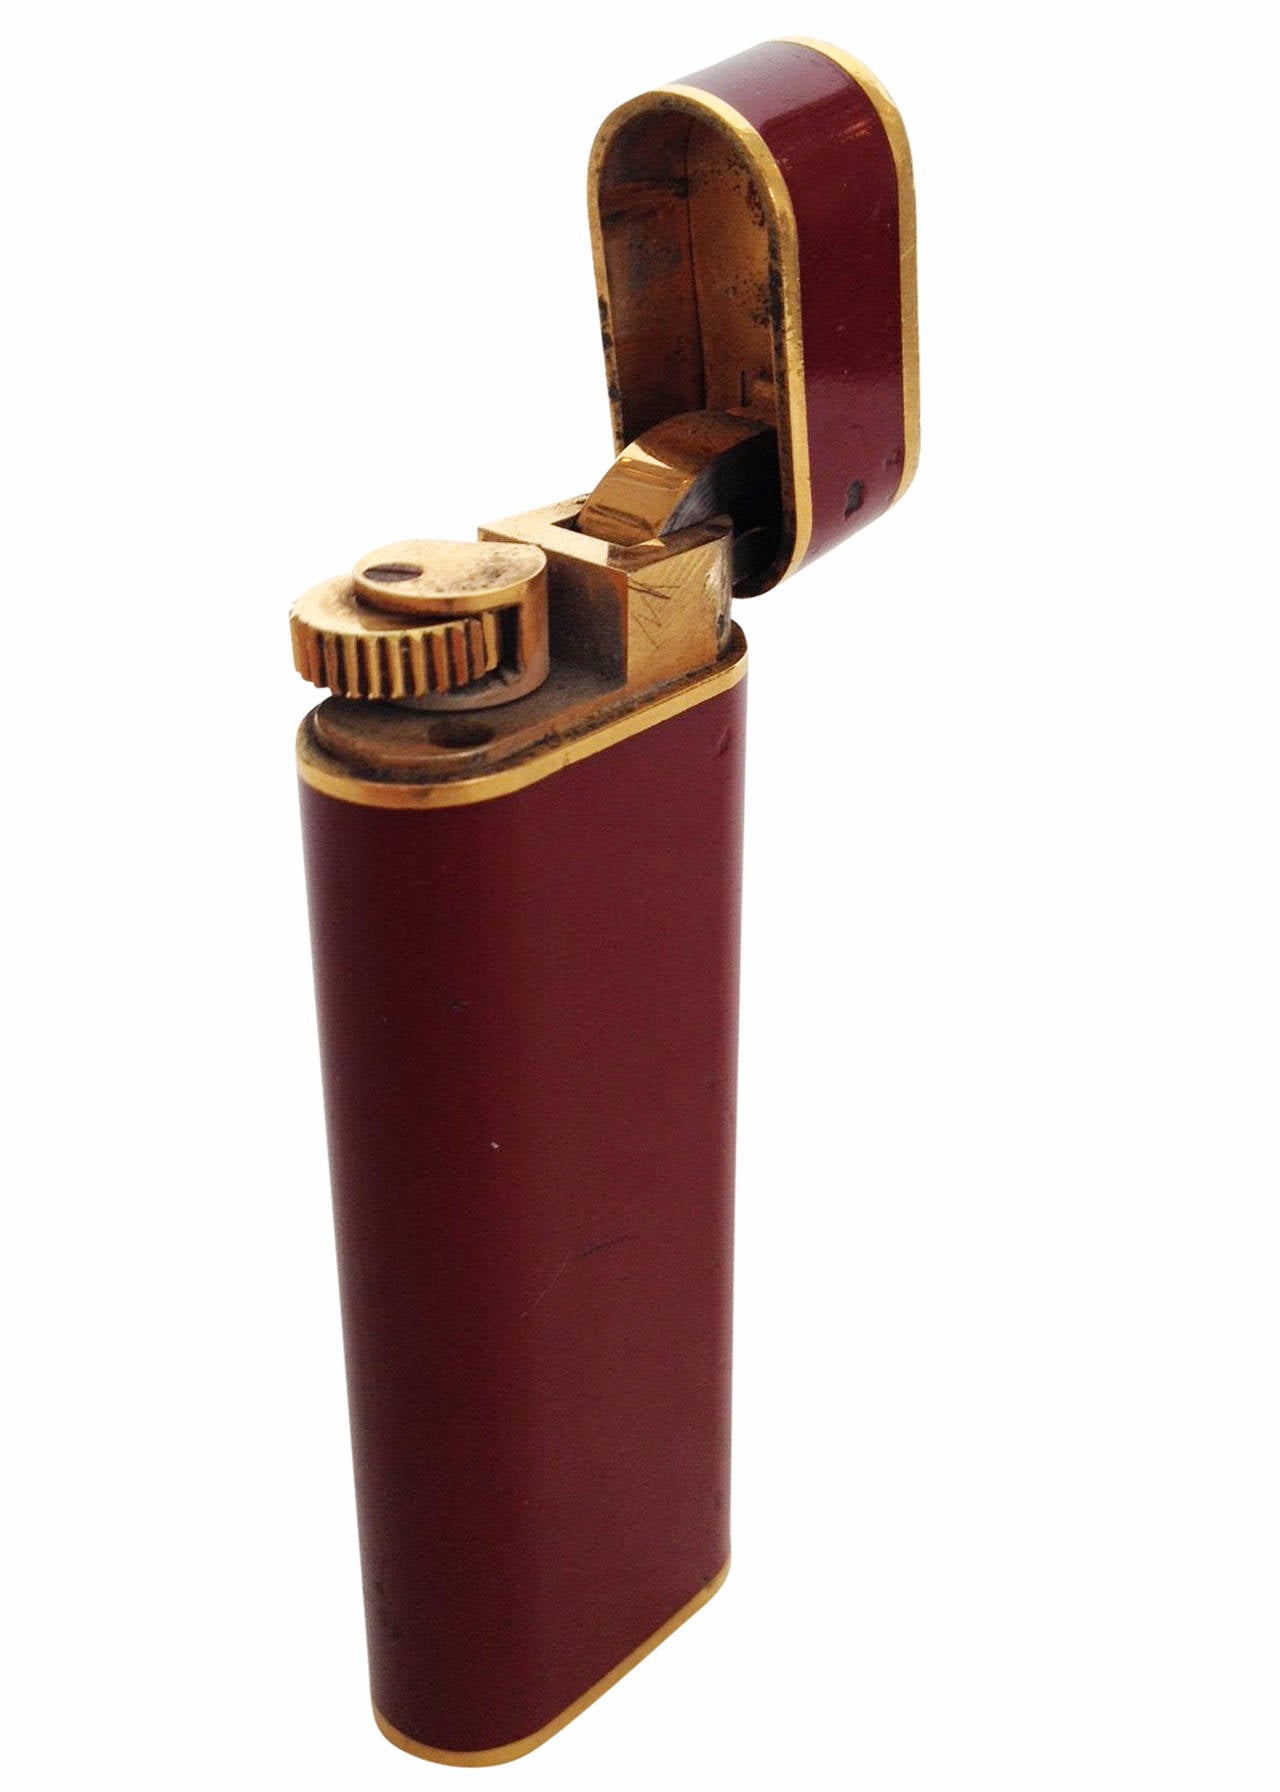 Made by Cartier, this 18-karat gold plated and black enamel lighter features an oval body with a beautiful, burgundy enamel inlay with gold border. Also feature is an interlocking 